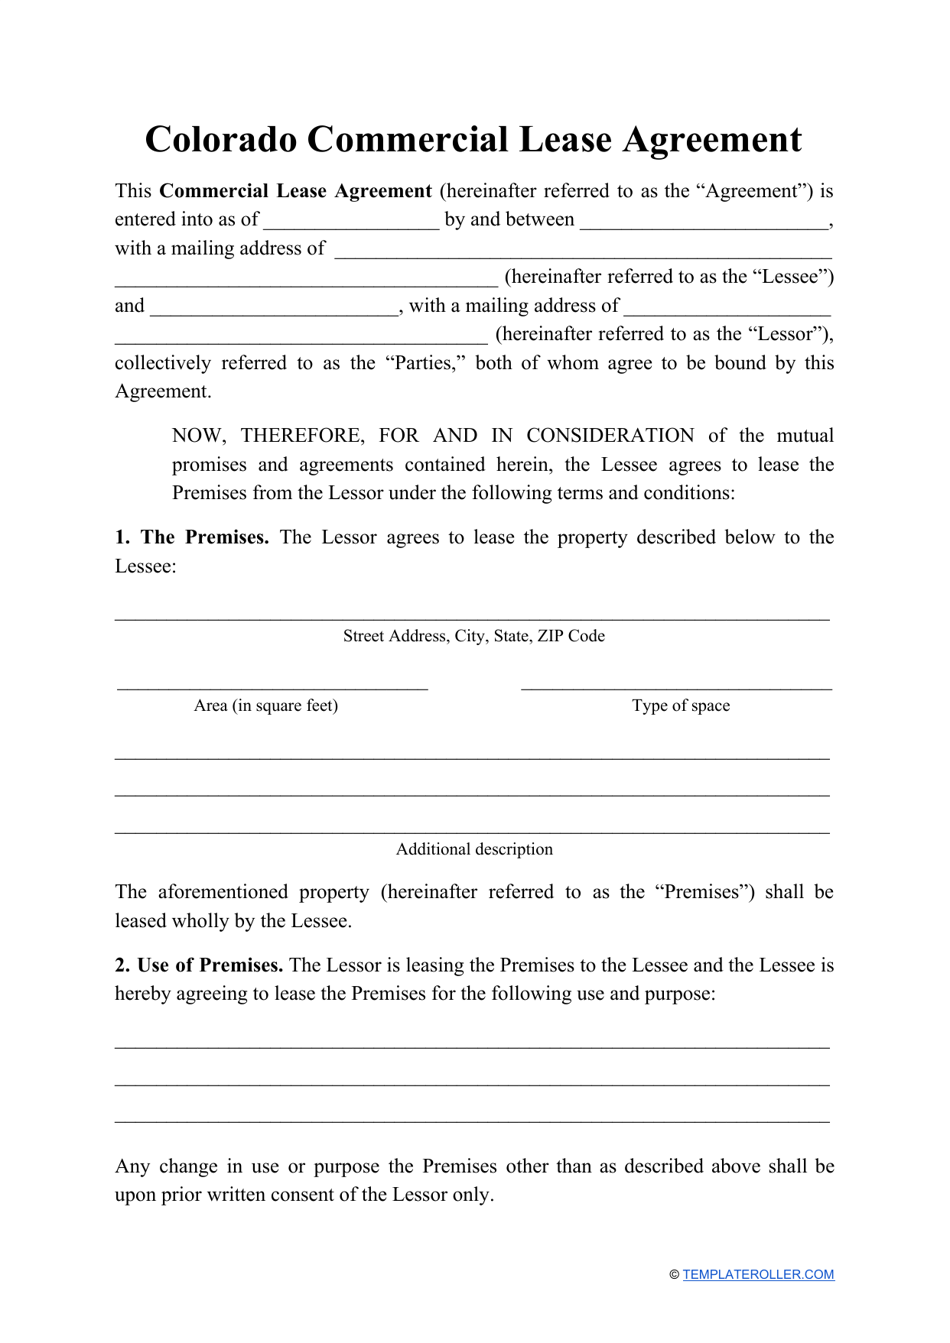 Commercial Lease Agreement Template - Colorado, Page 1